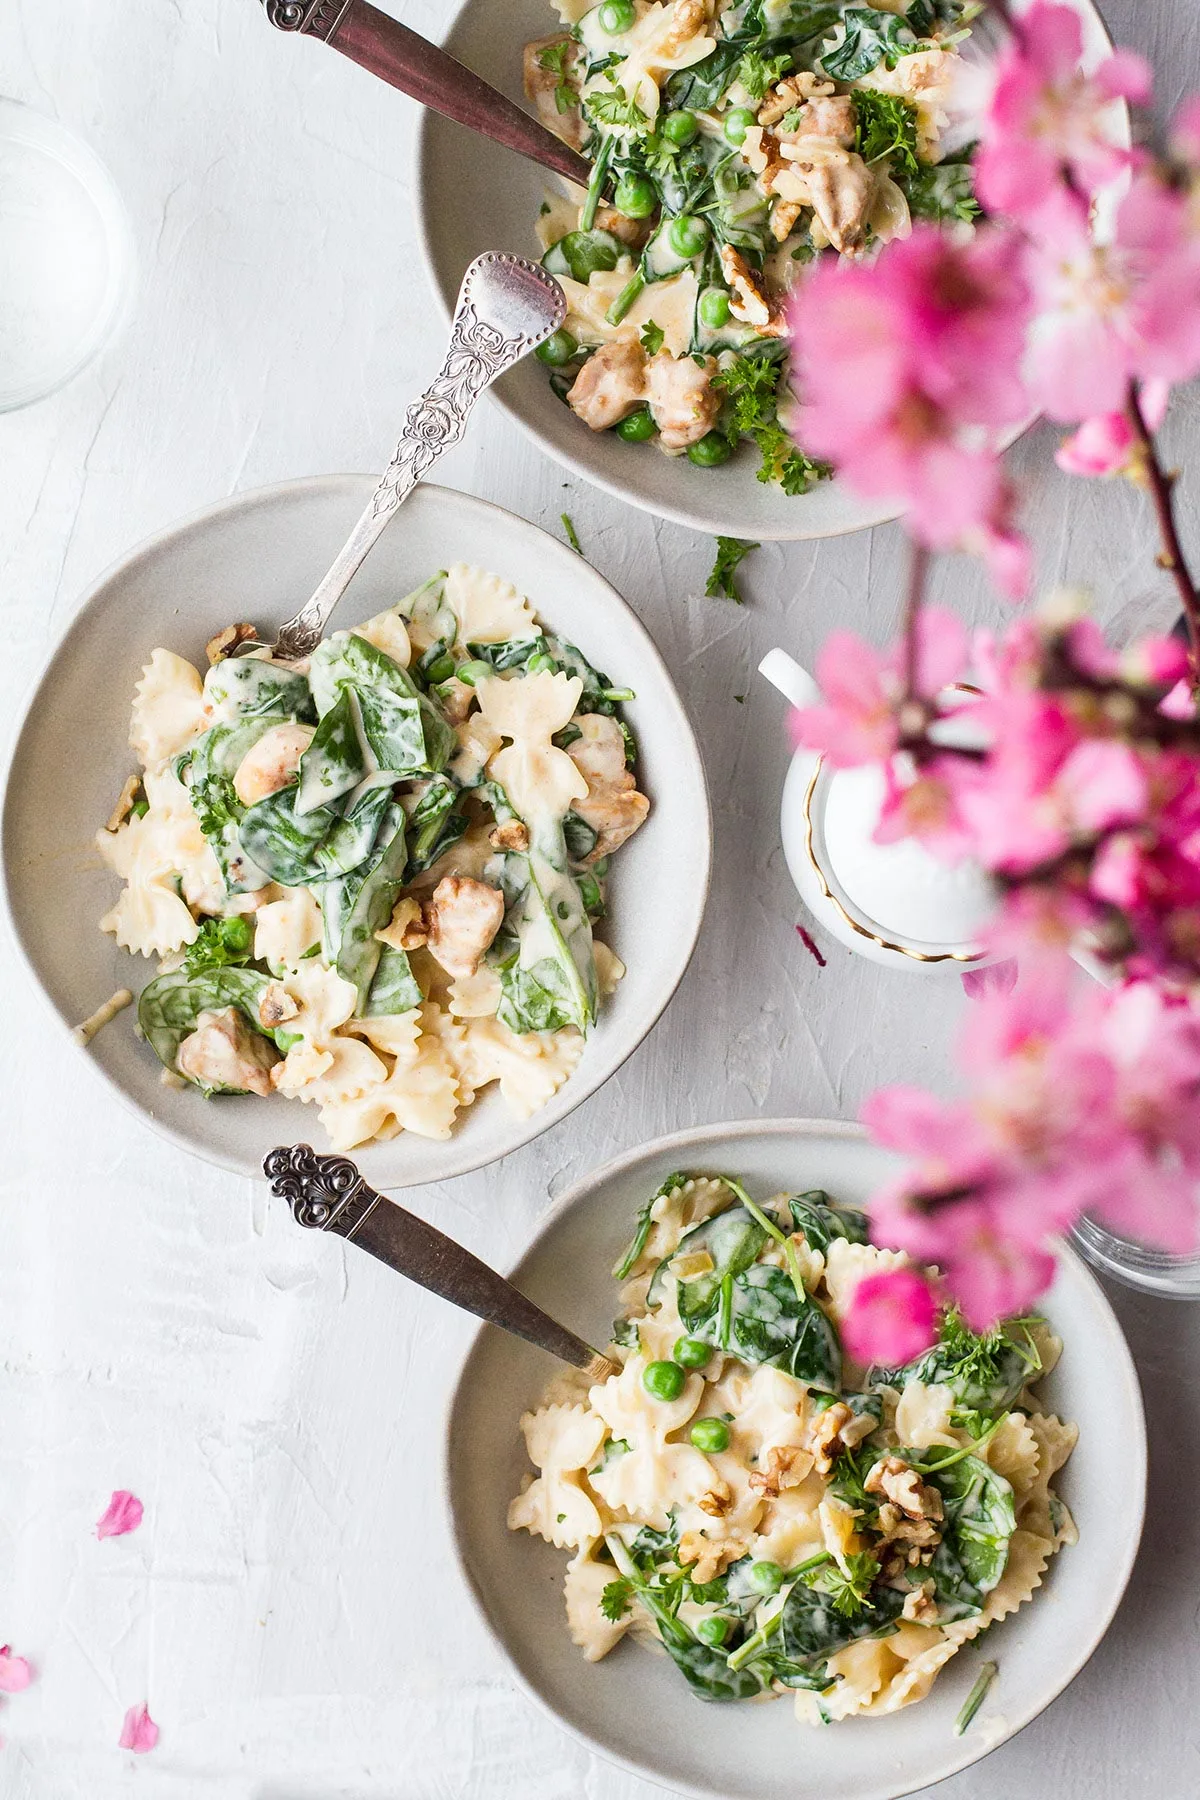 Three bowls with pasta and peas, pink flowers in the foreground.